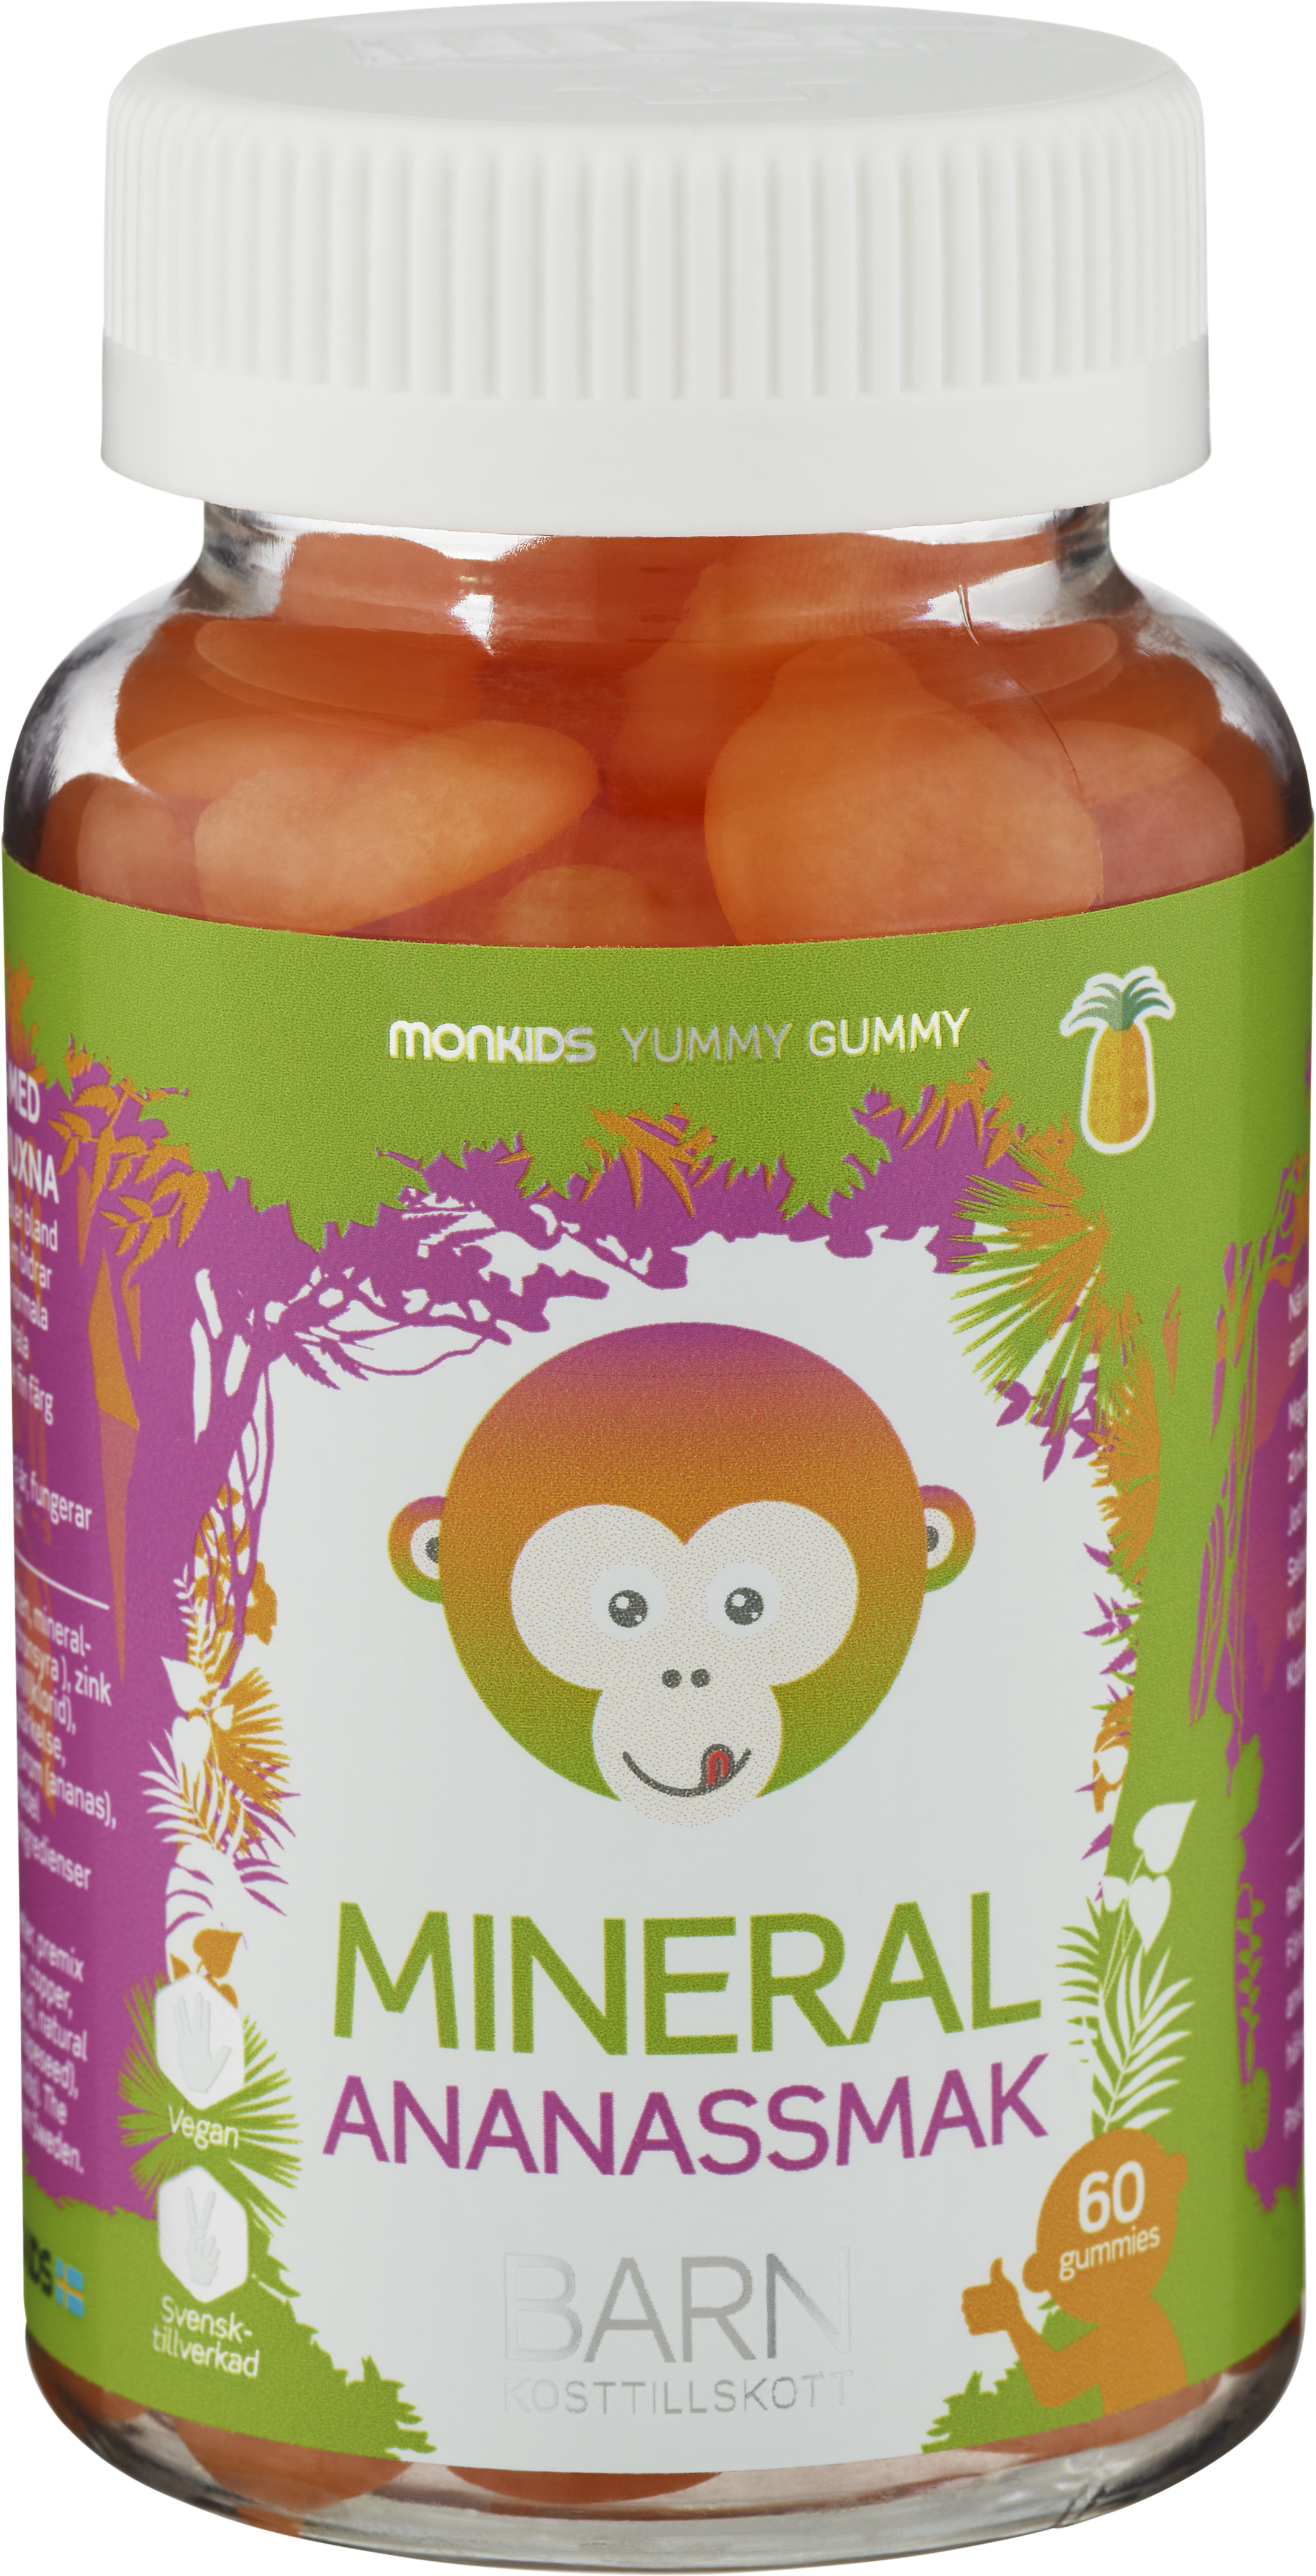 Monkids Mineral Ananas 60 st